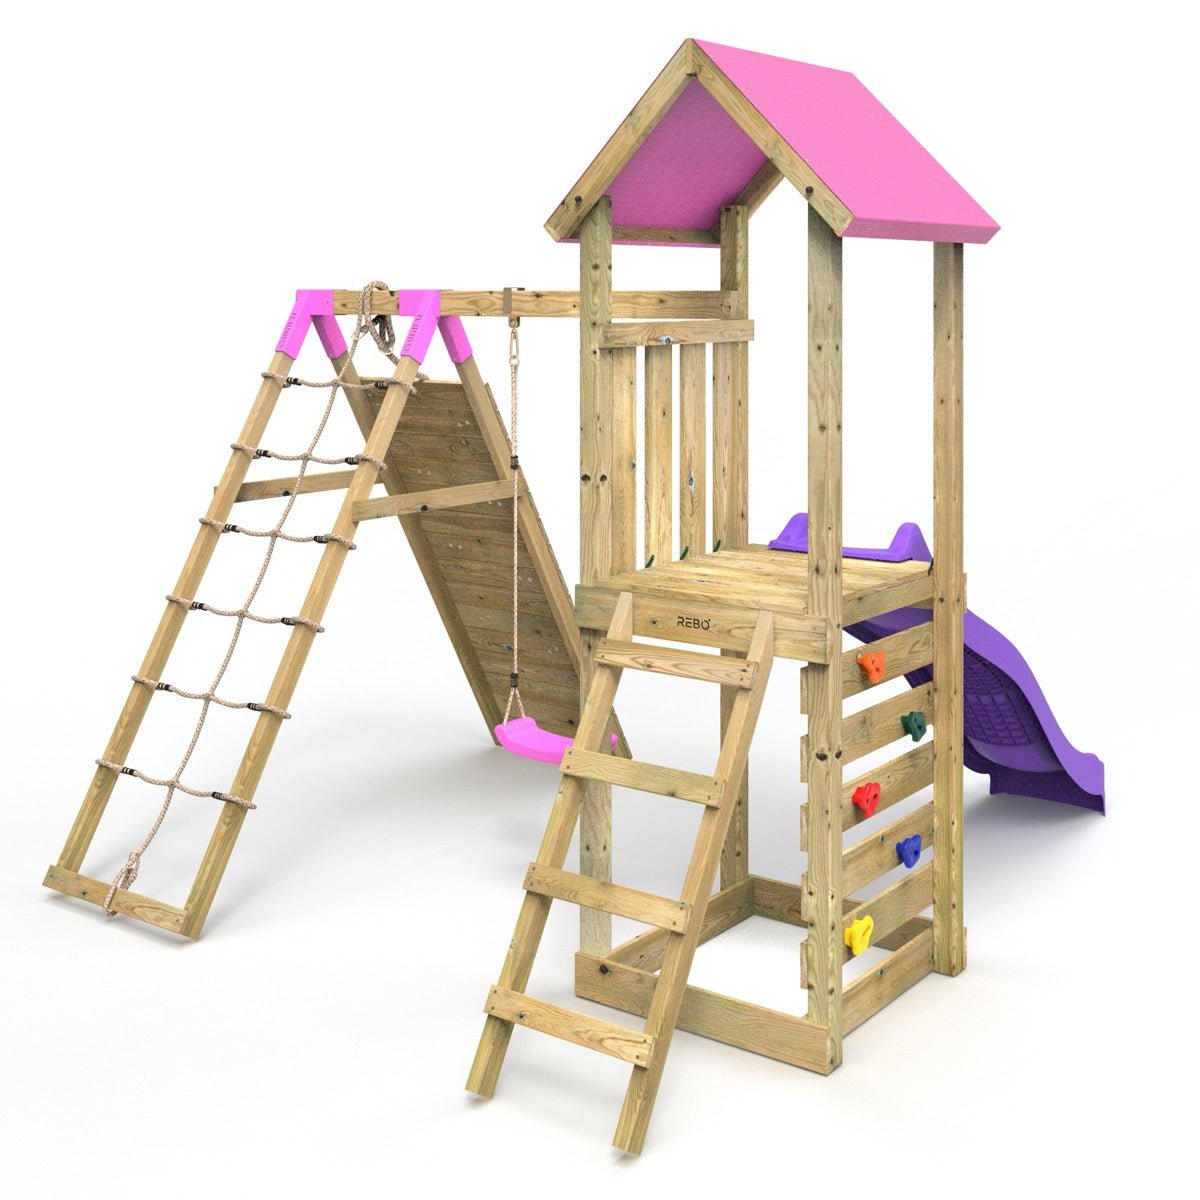 Rebo Challenge Wooden Climbing Frame with Swings, Slide and Up & over Climbing wall - Bear Pink